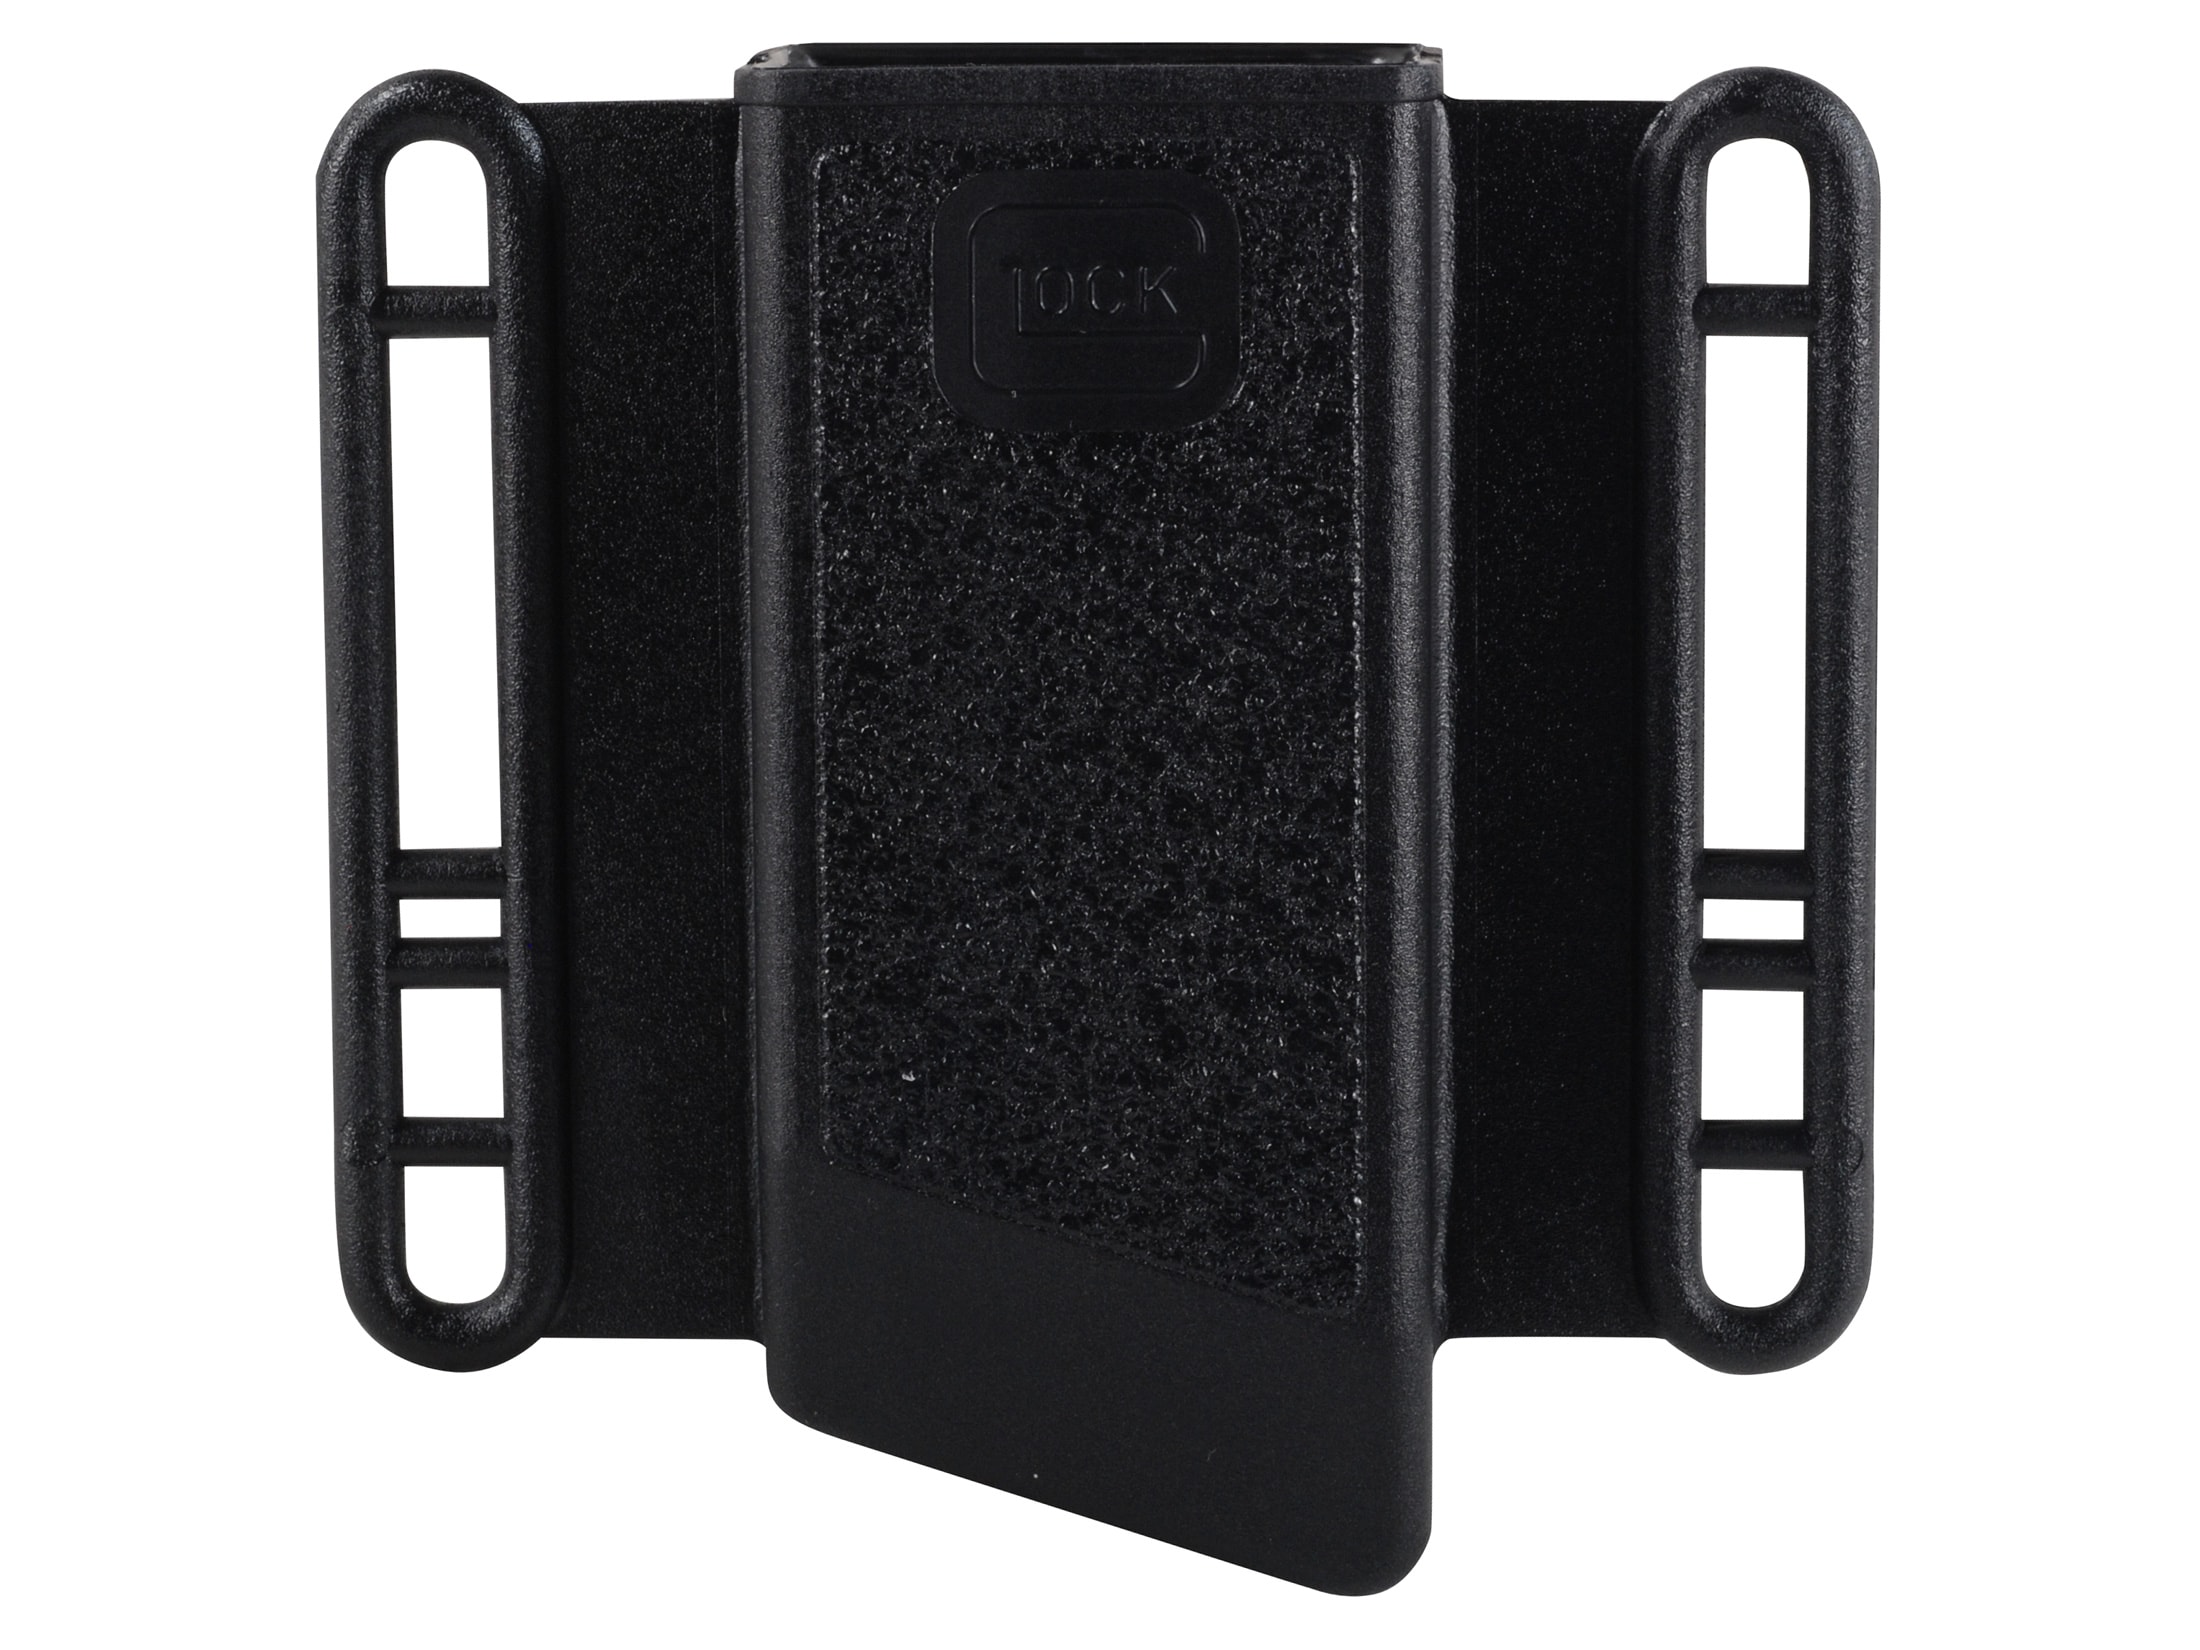 Double Magazine Pouch Holder for Glock 17,19,22,23,26,27,31,32,33,34,35,37,38,39 